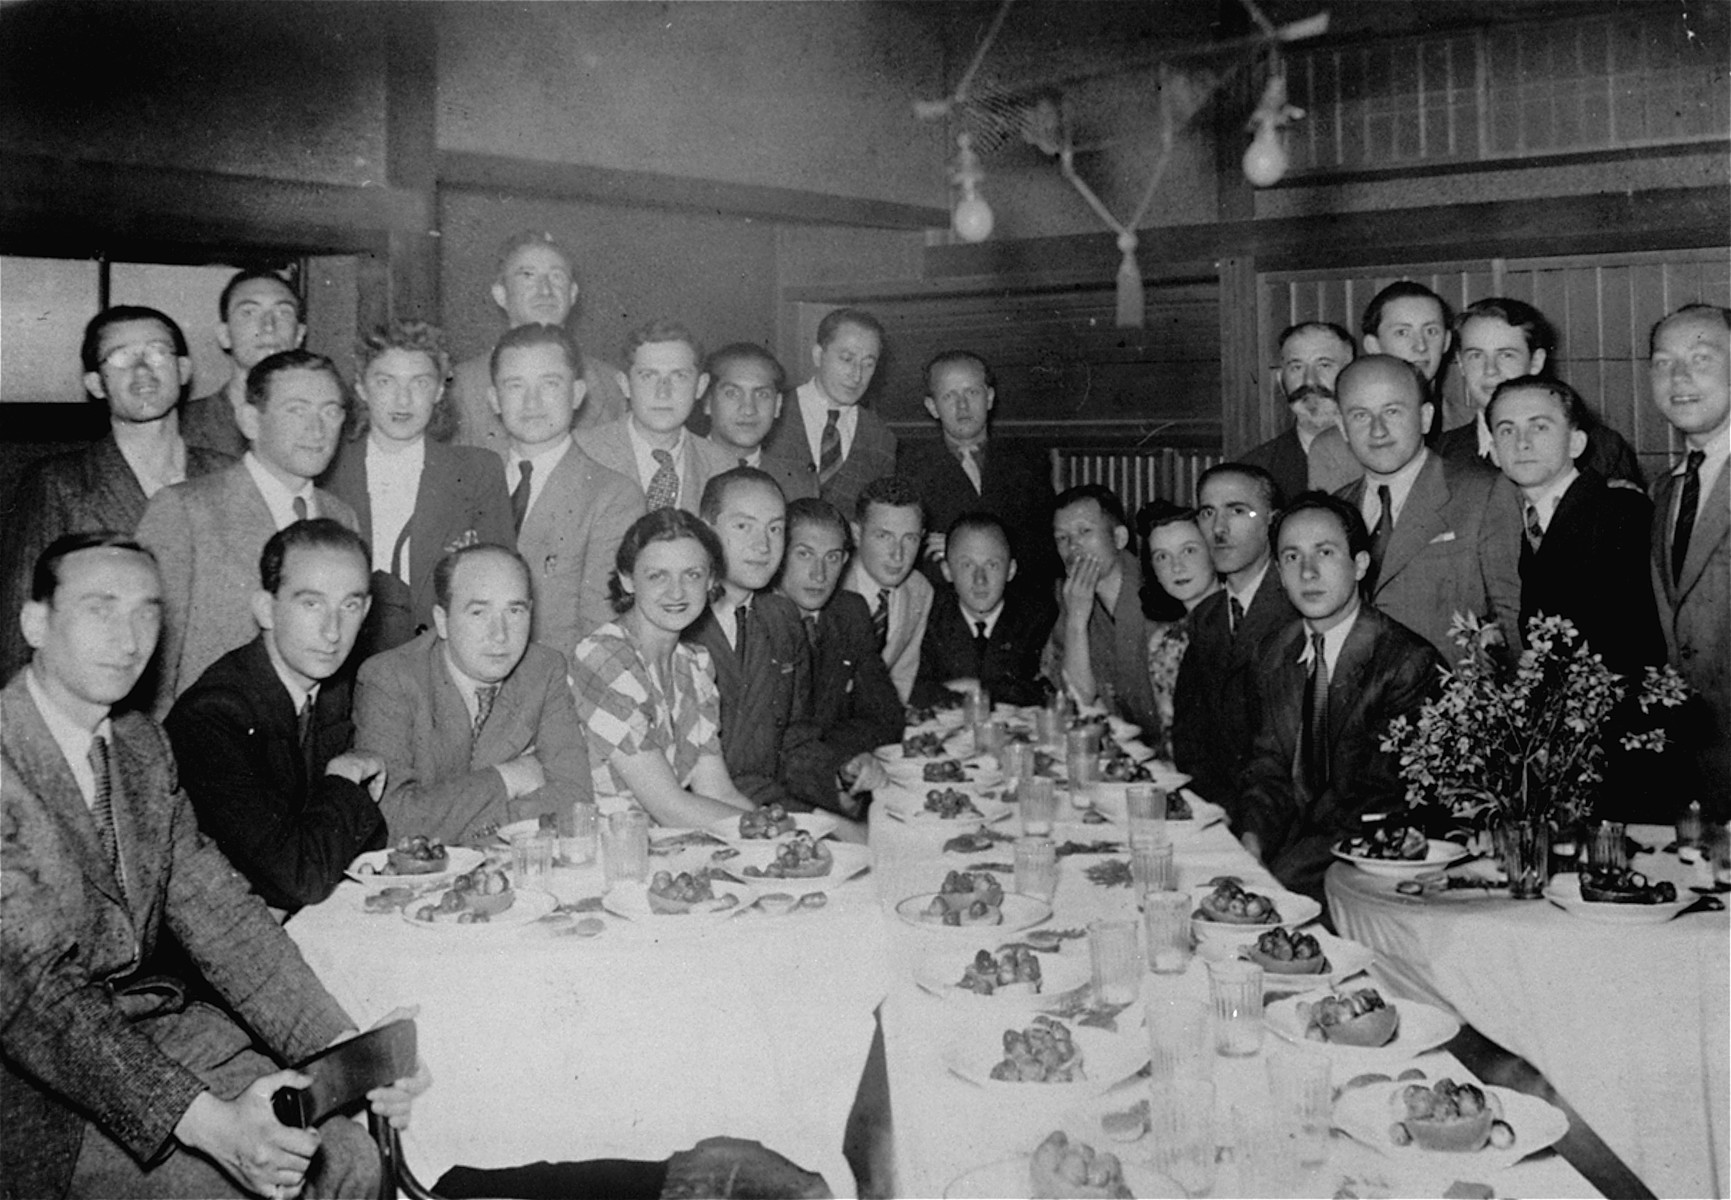 Group portrait of Jewish refugees in Kobe, Japan, who escaped from Europe with visas signed by Chiune Sugihara.